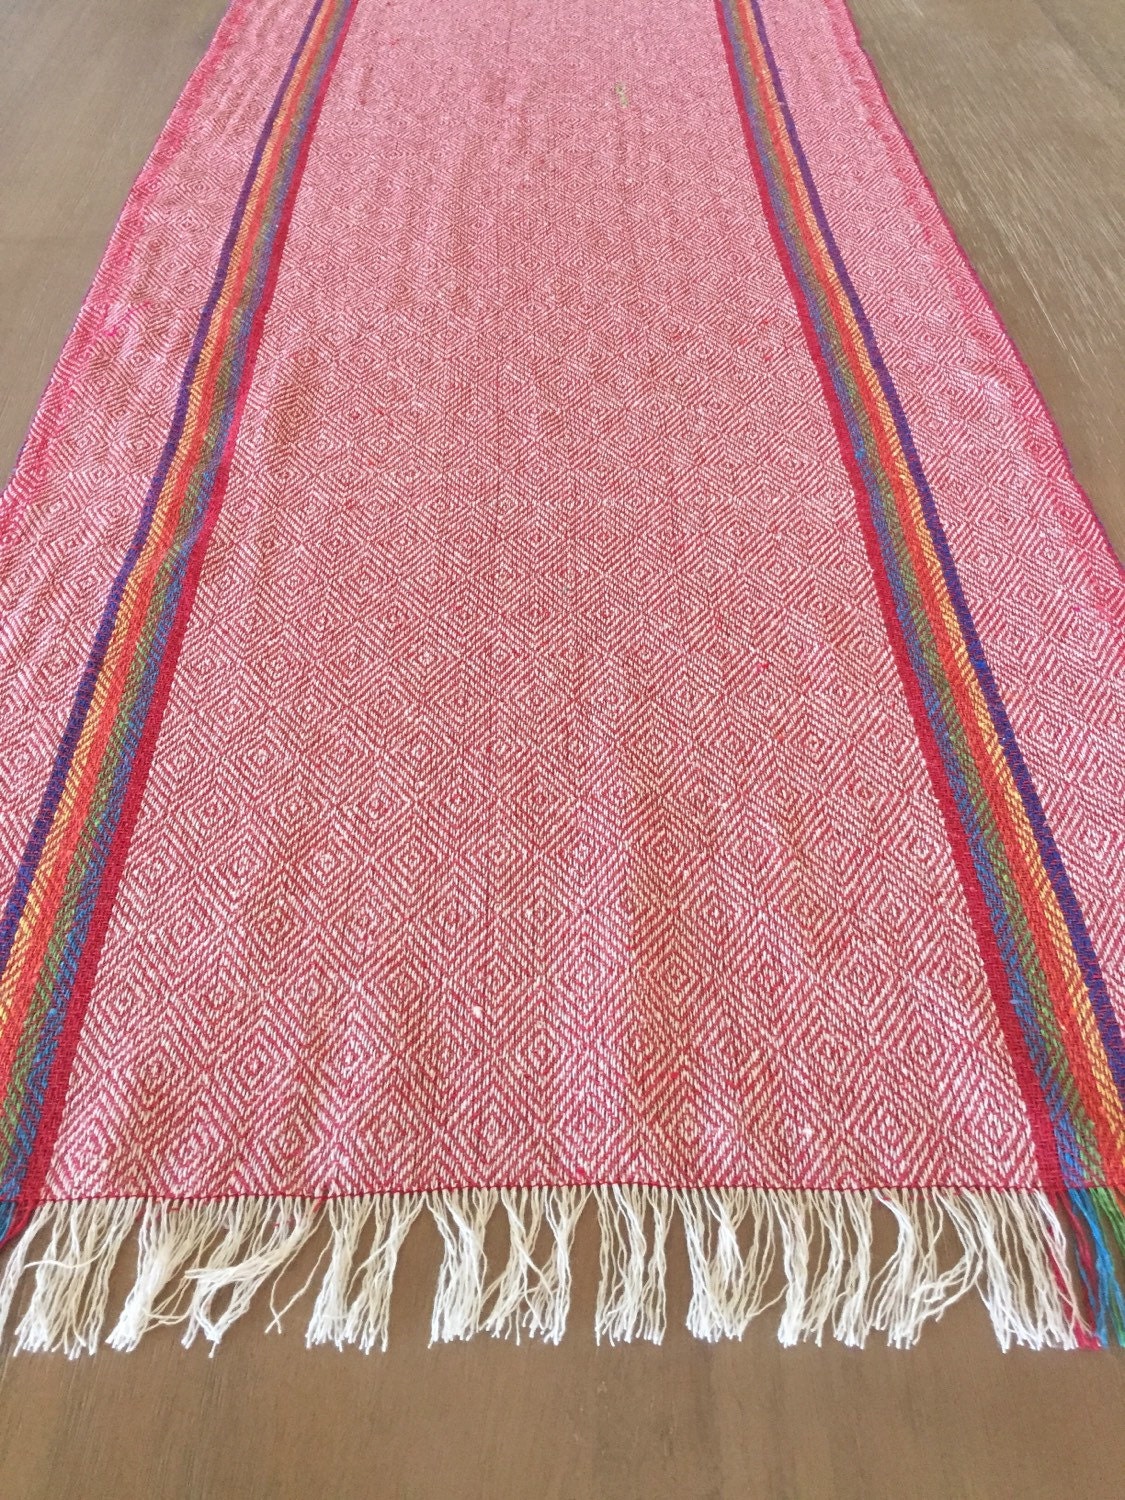 Rustic Table Runner Mexican Red Jerga Style Boho Chic - Etsy